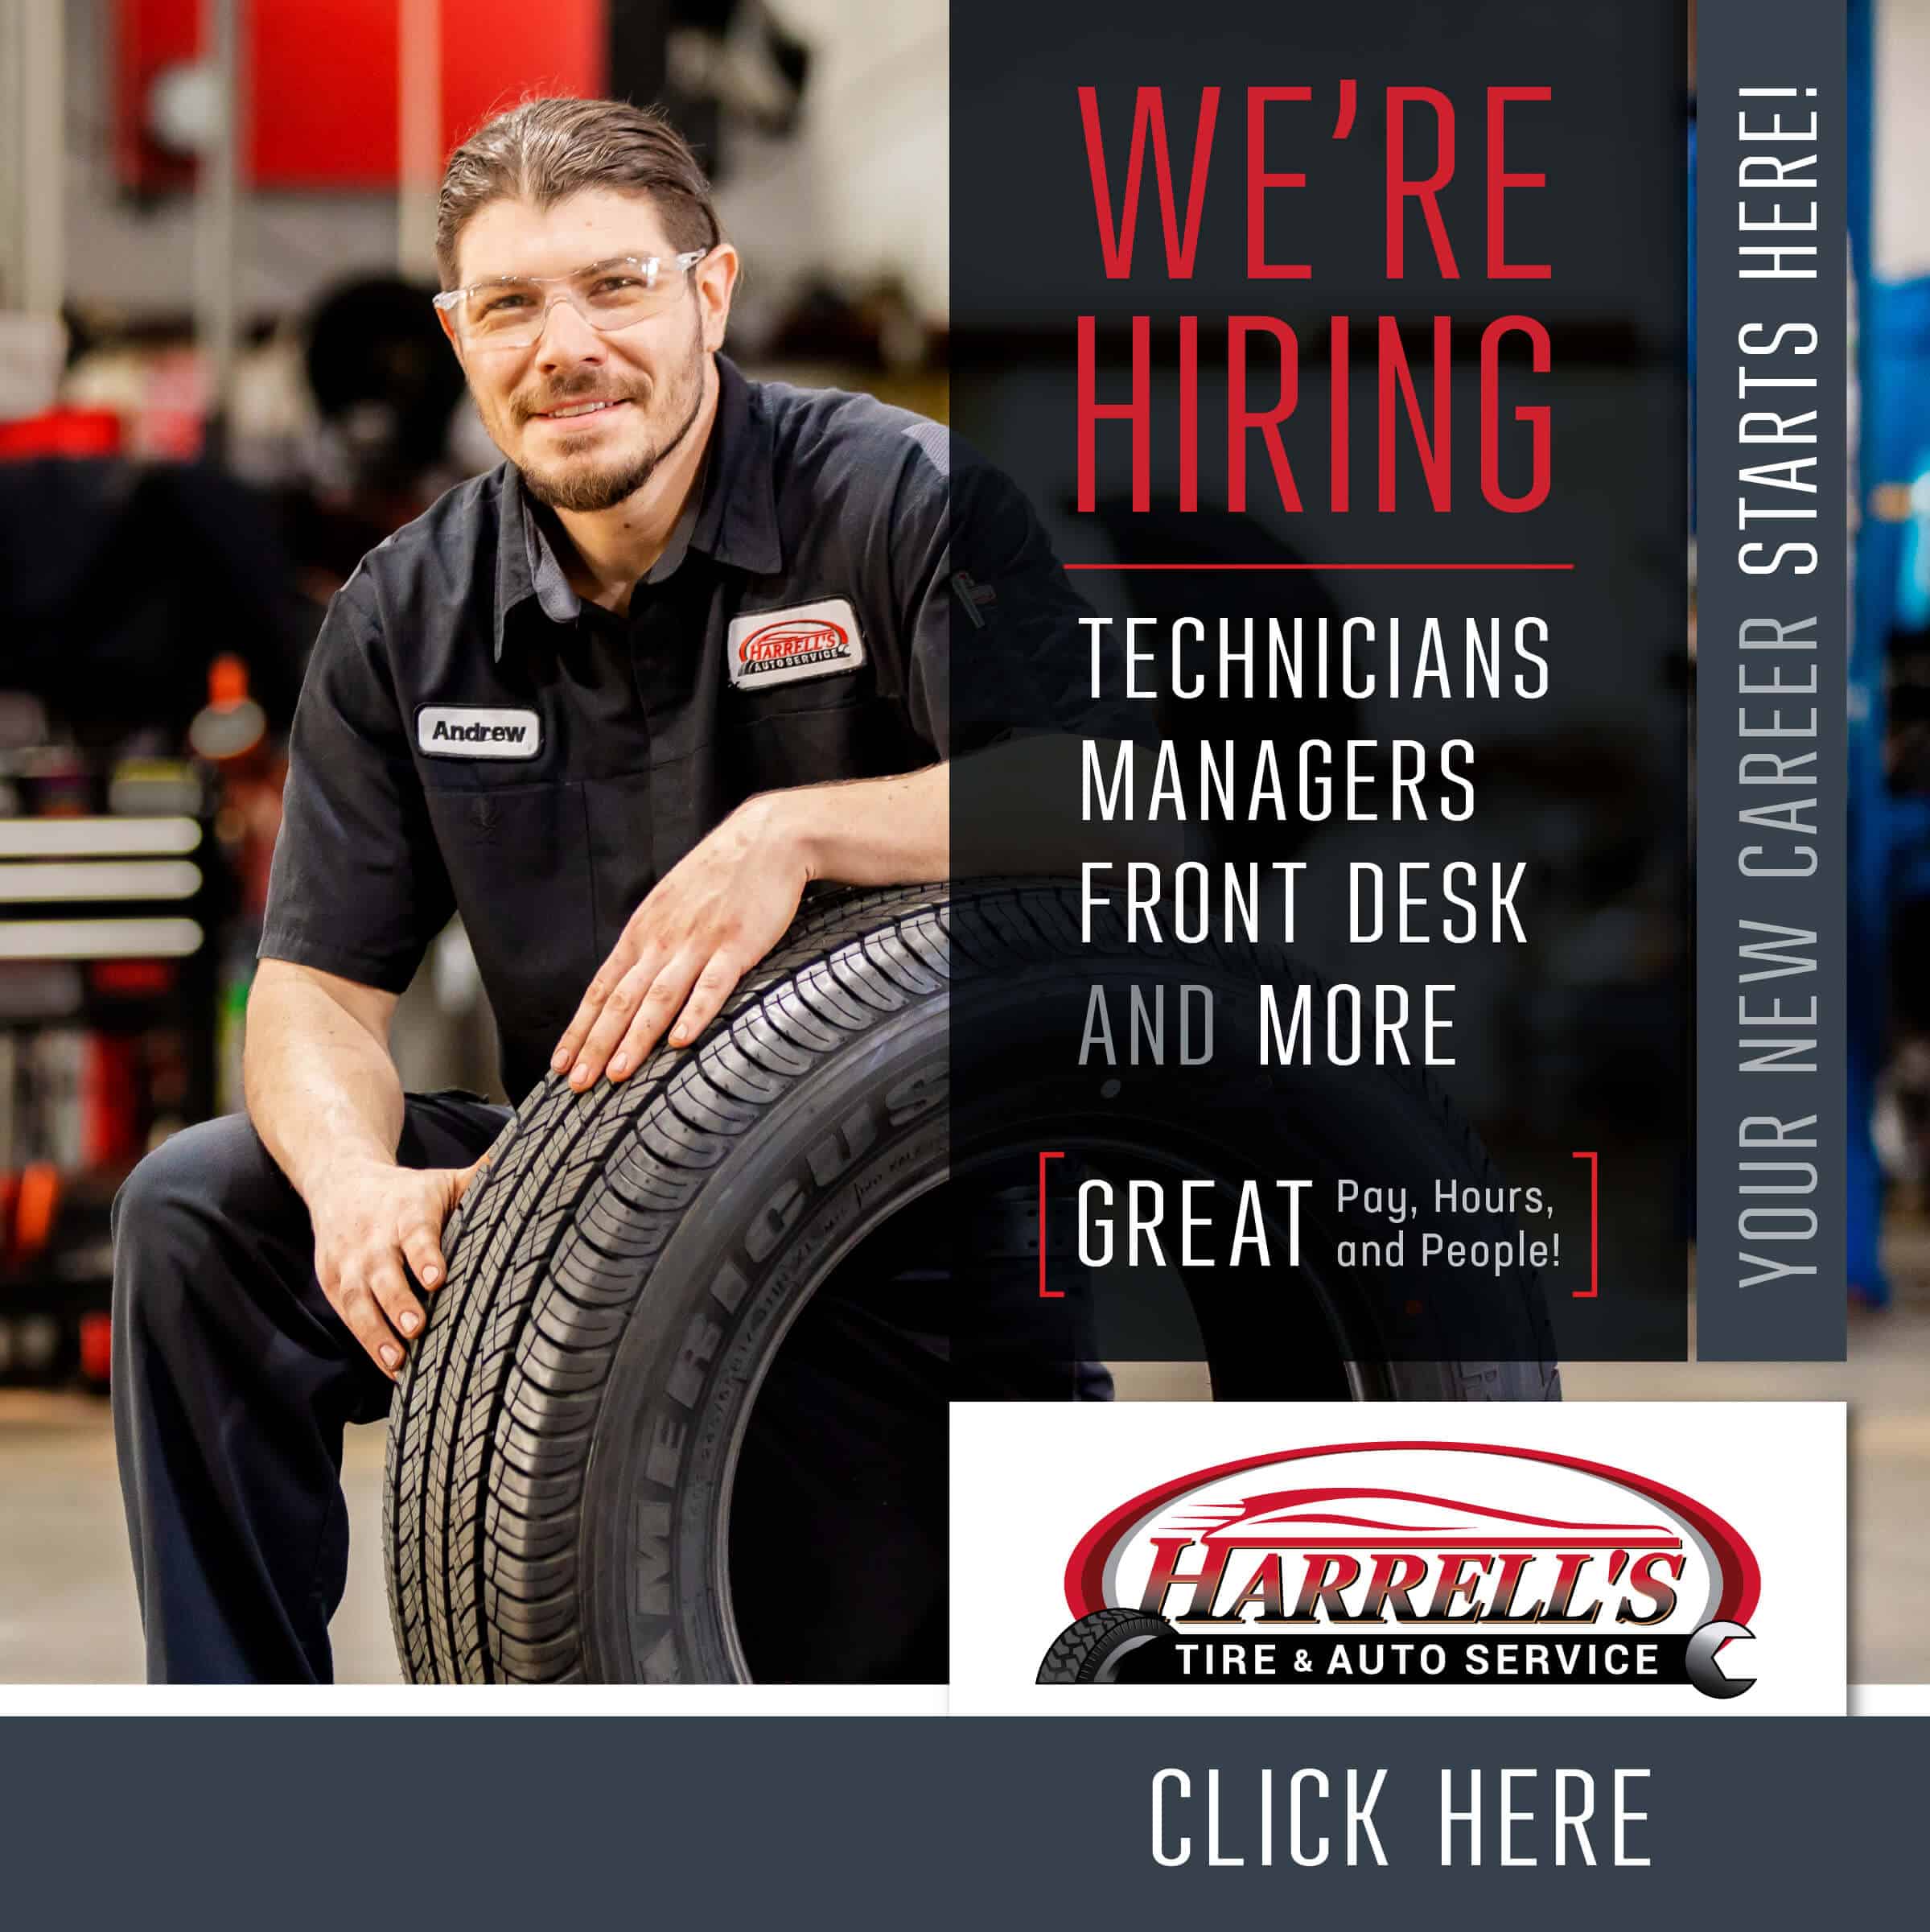 We are Hiring, Click here to learn more